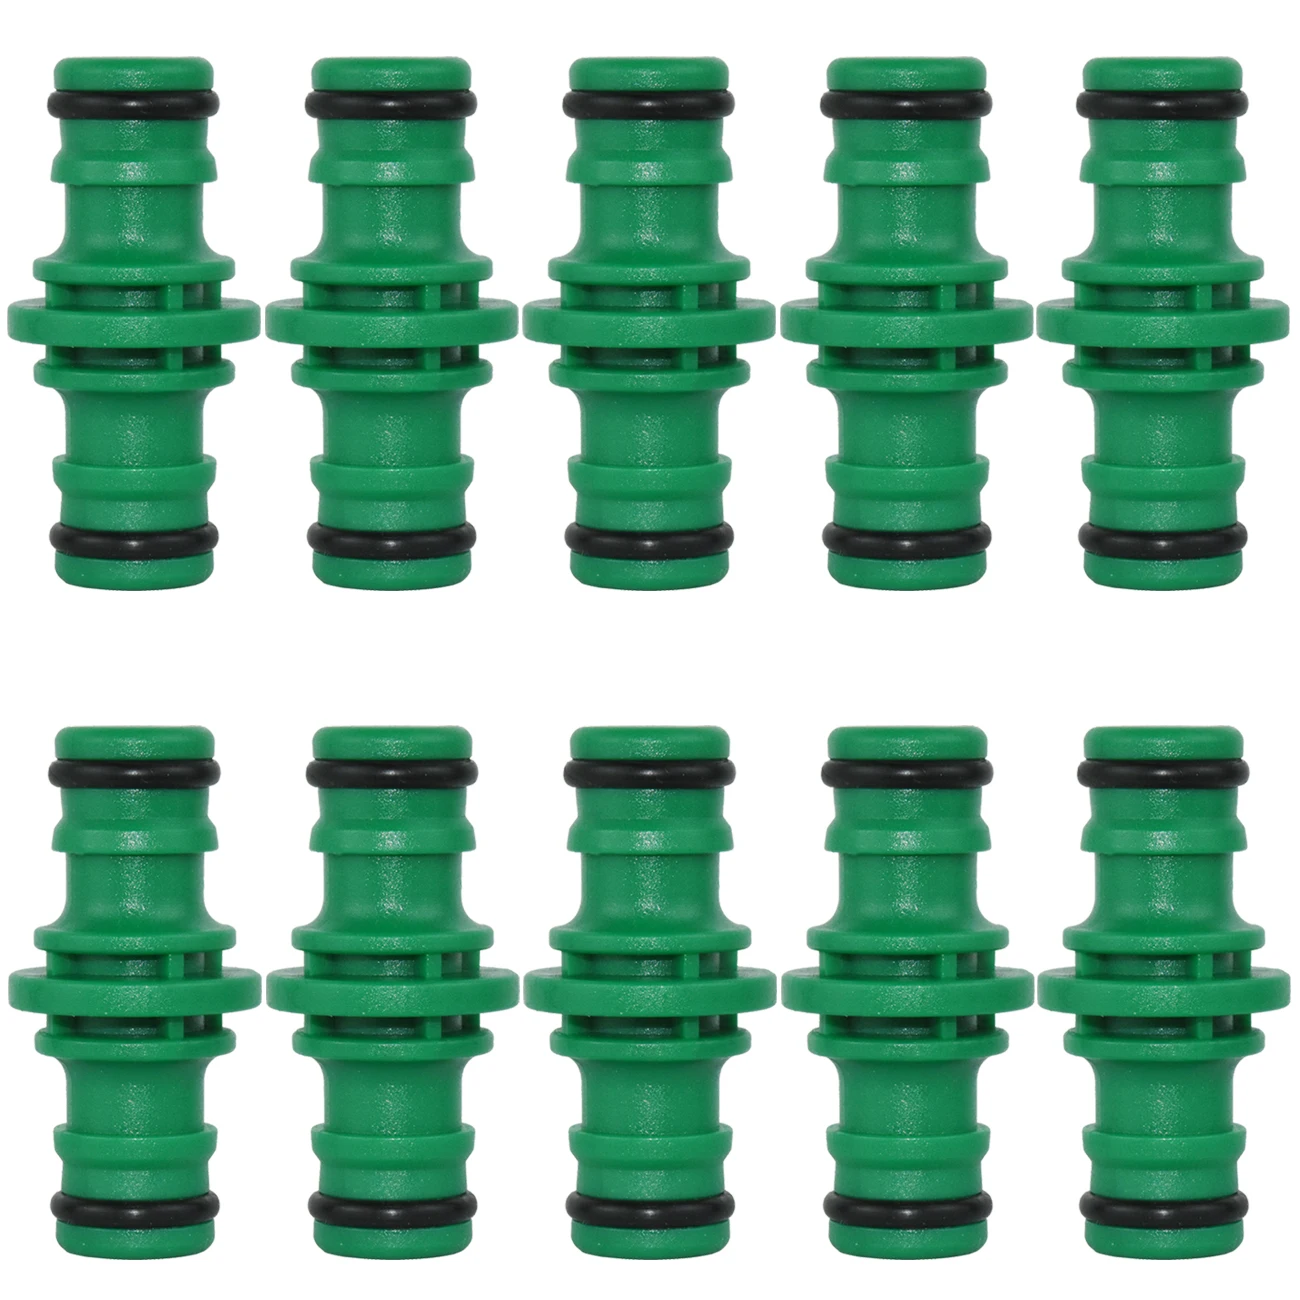 

10pcs 1/2'' Joiner Repair Connector Coupling Garden Hose Tubing Fitting Pipe Quick Drip Irrigation Watering System Greenhouse